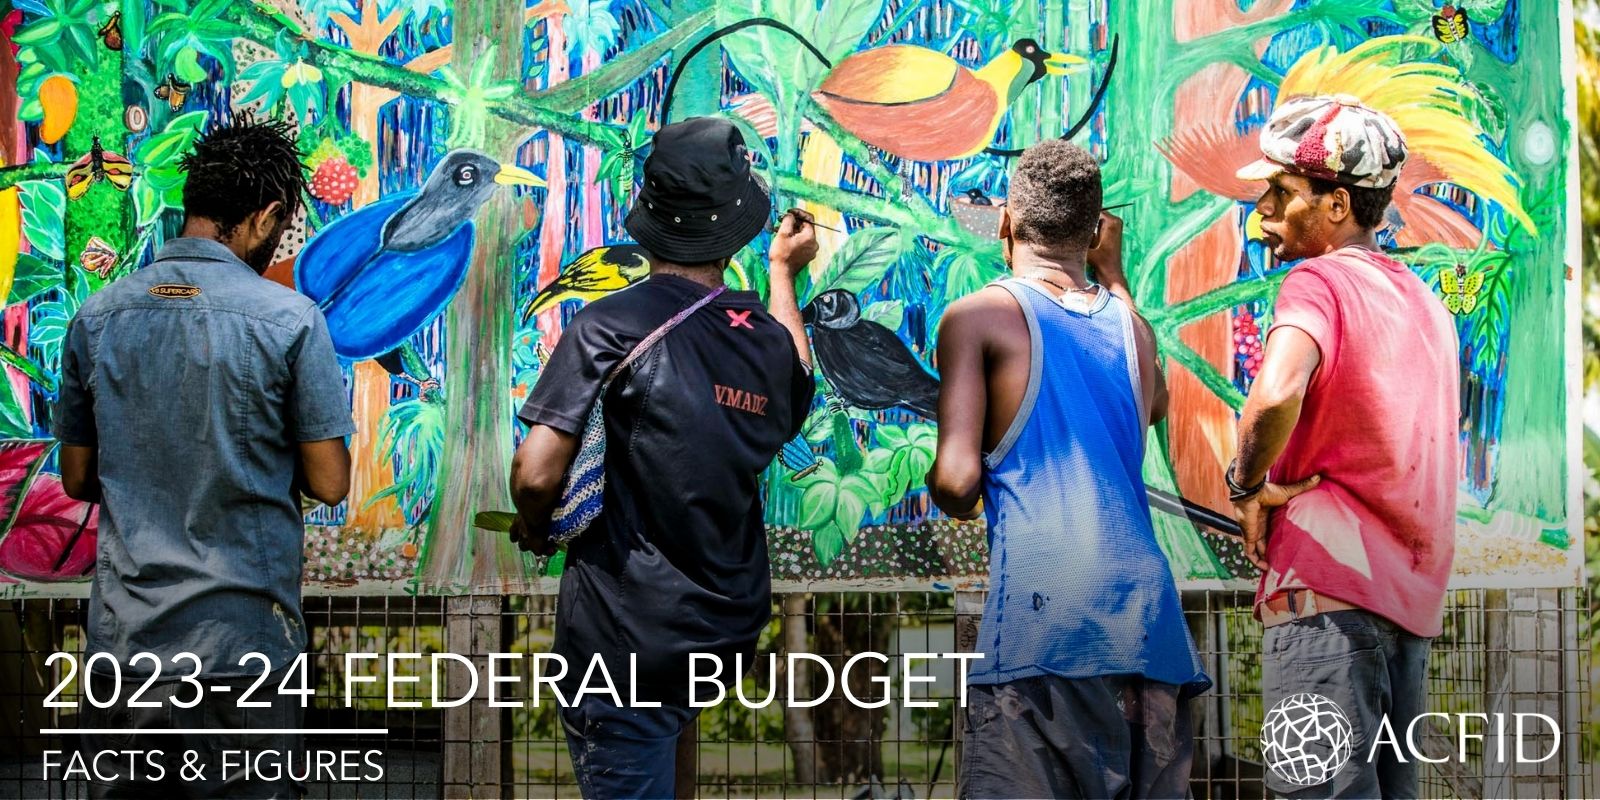 ACFID 2023-24 Federal Budget Front Cover. Features an image from PNG of men painting a mural